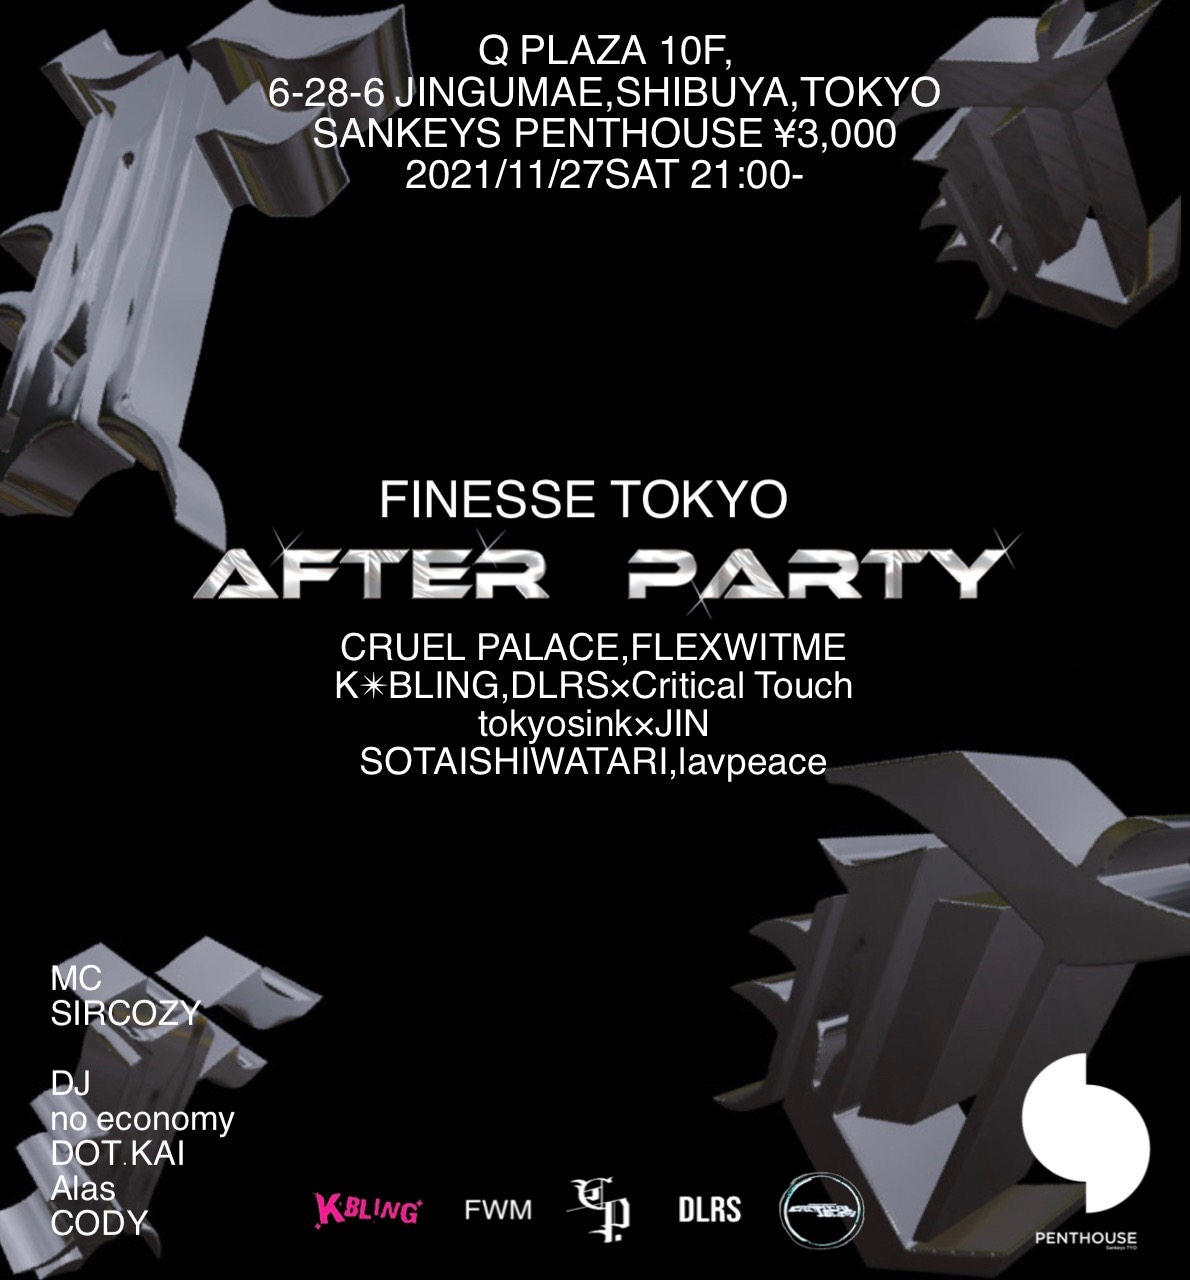 FINESSE TOKYO AFTER PARTY